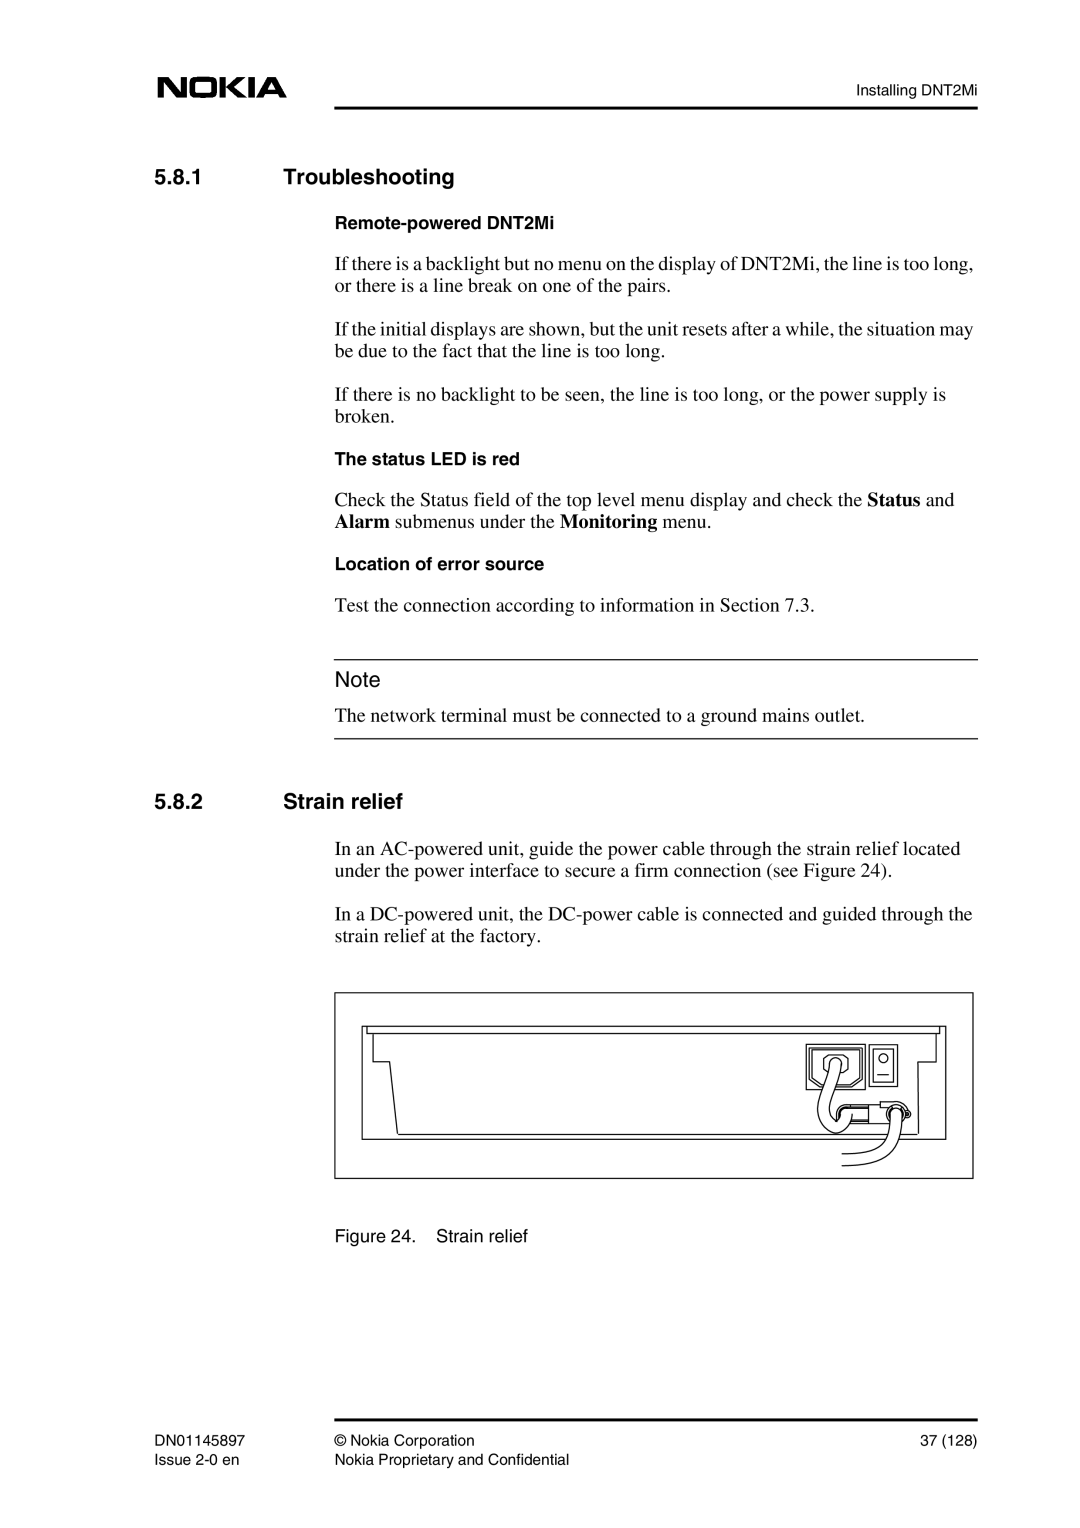 Nokia DNT2Mi sp/mp user manual Troubleshooting, Strain relief 